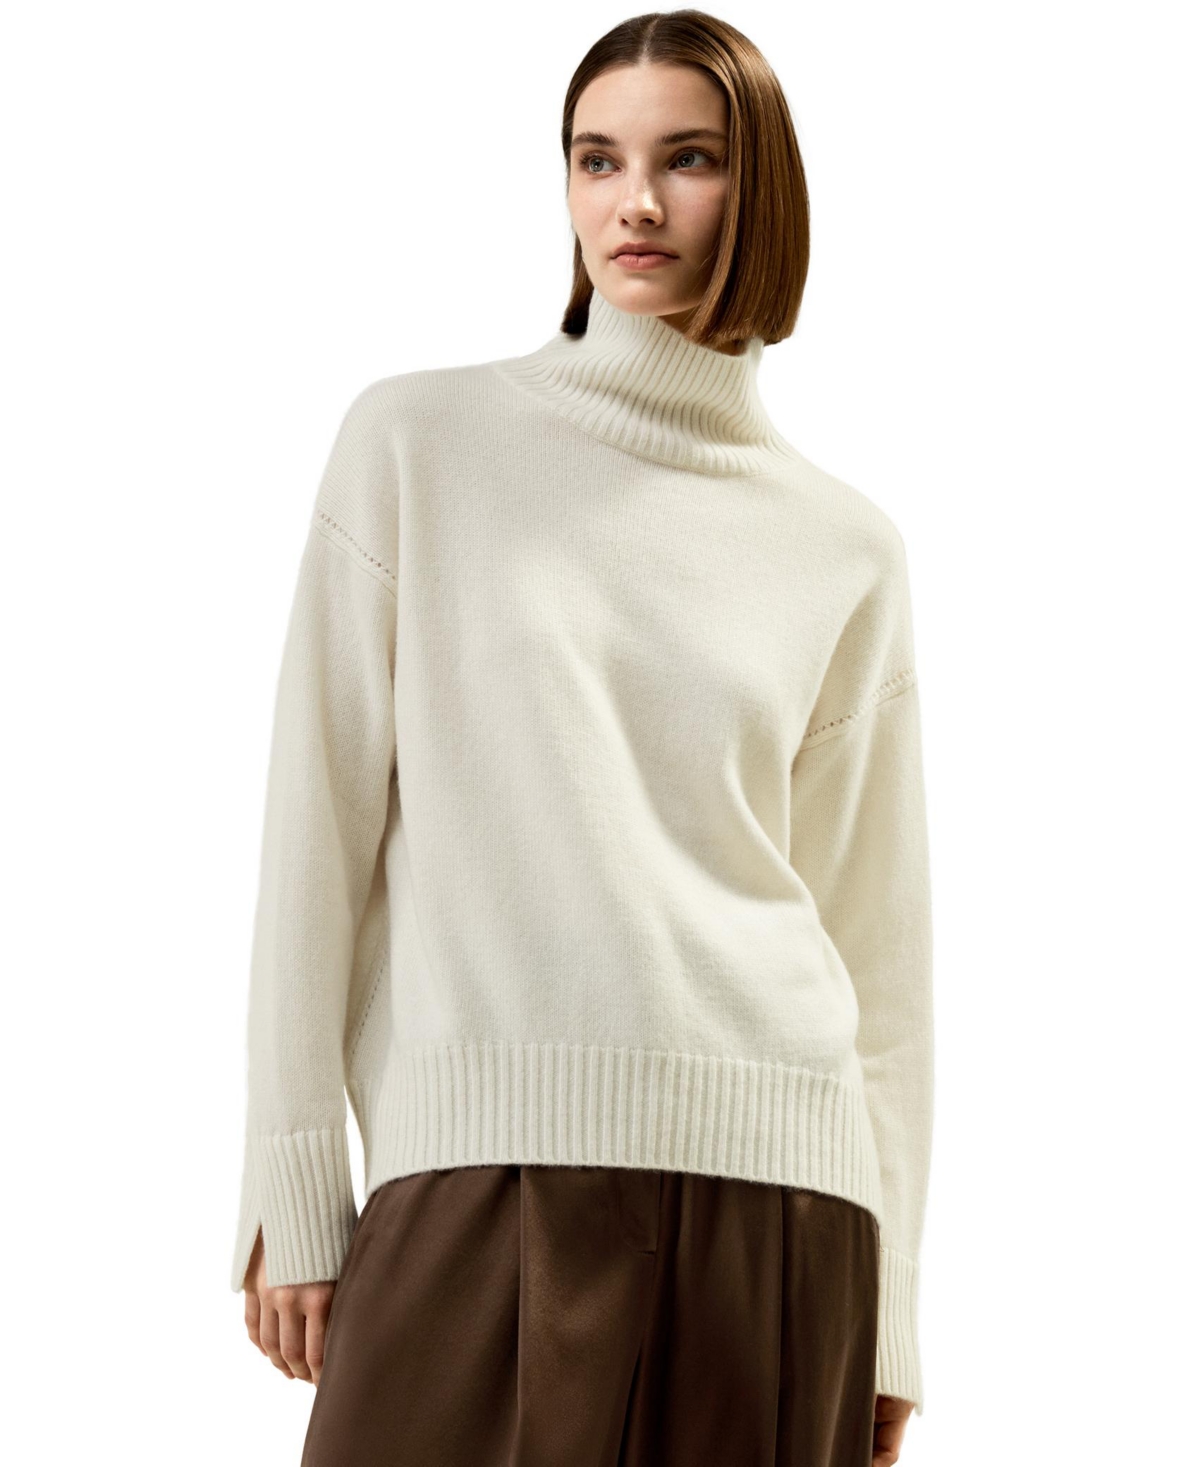 Turtleneck Relaxed-Fit Cashmere Sweater for Women - White